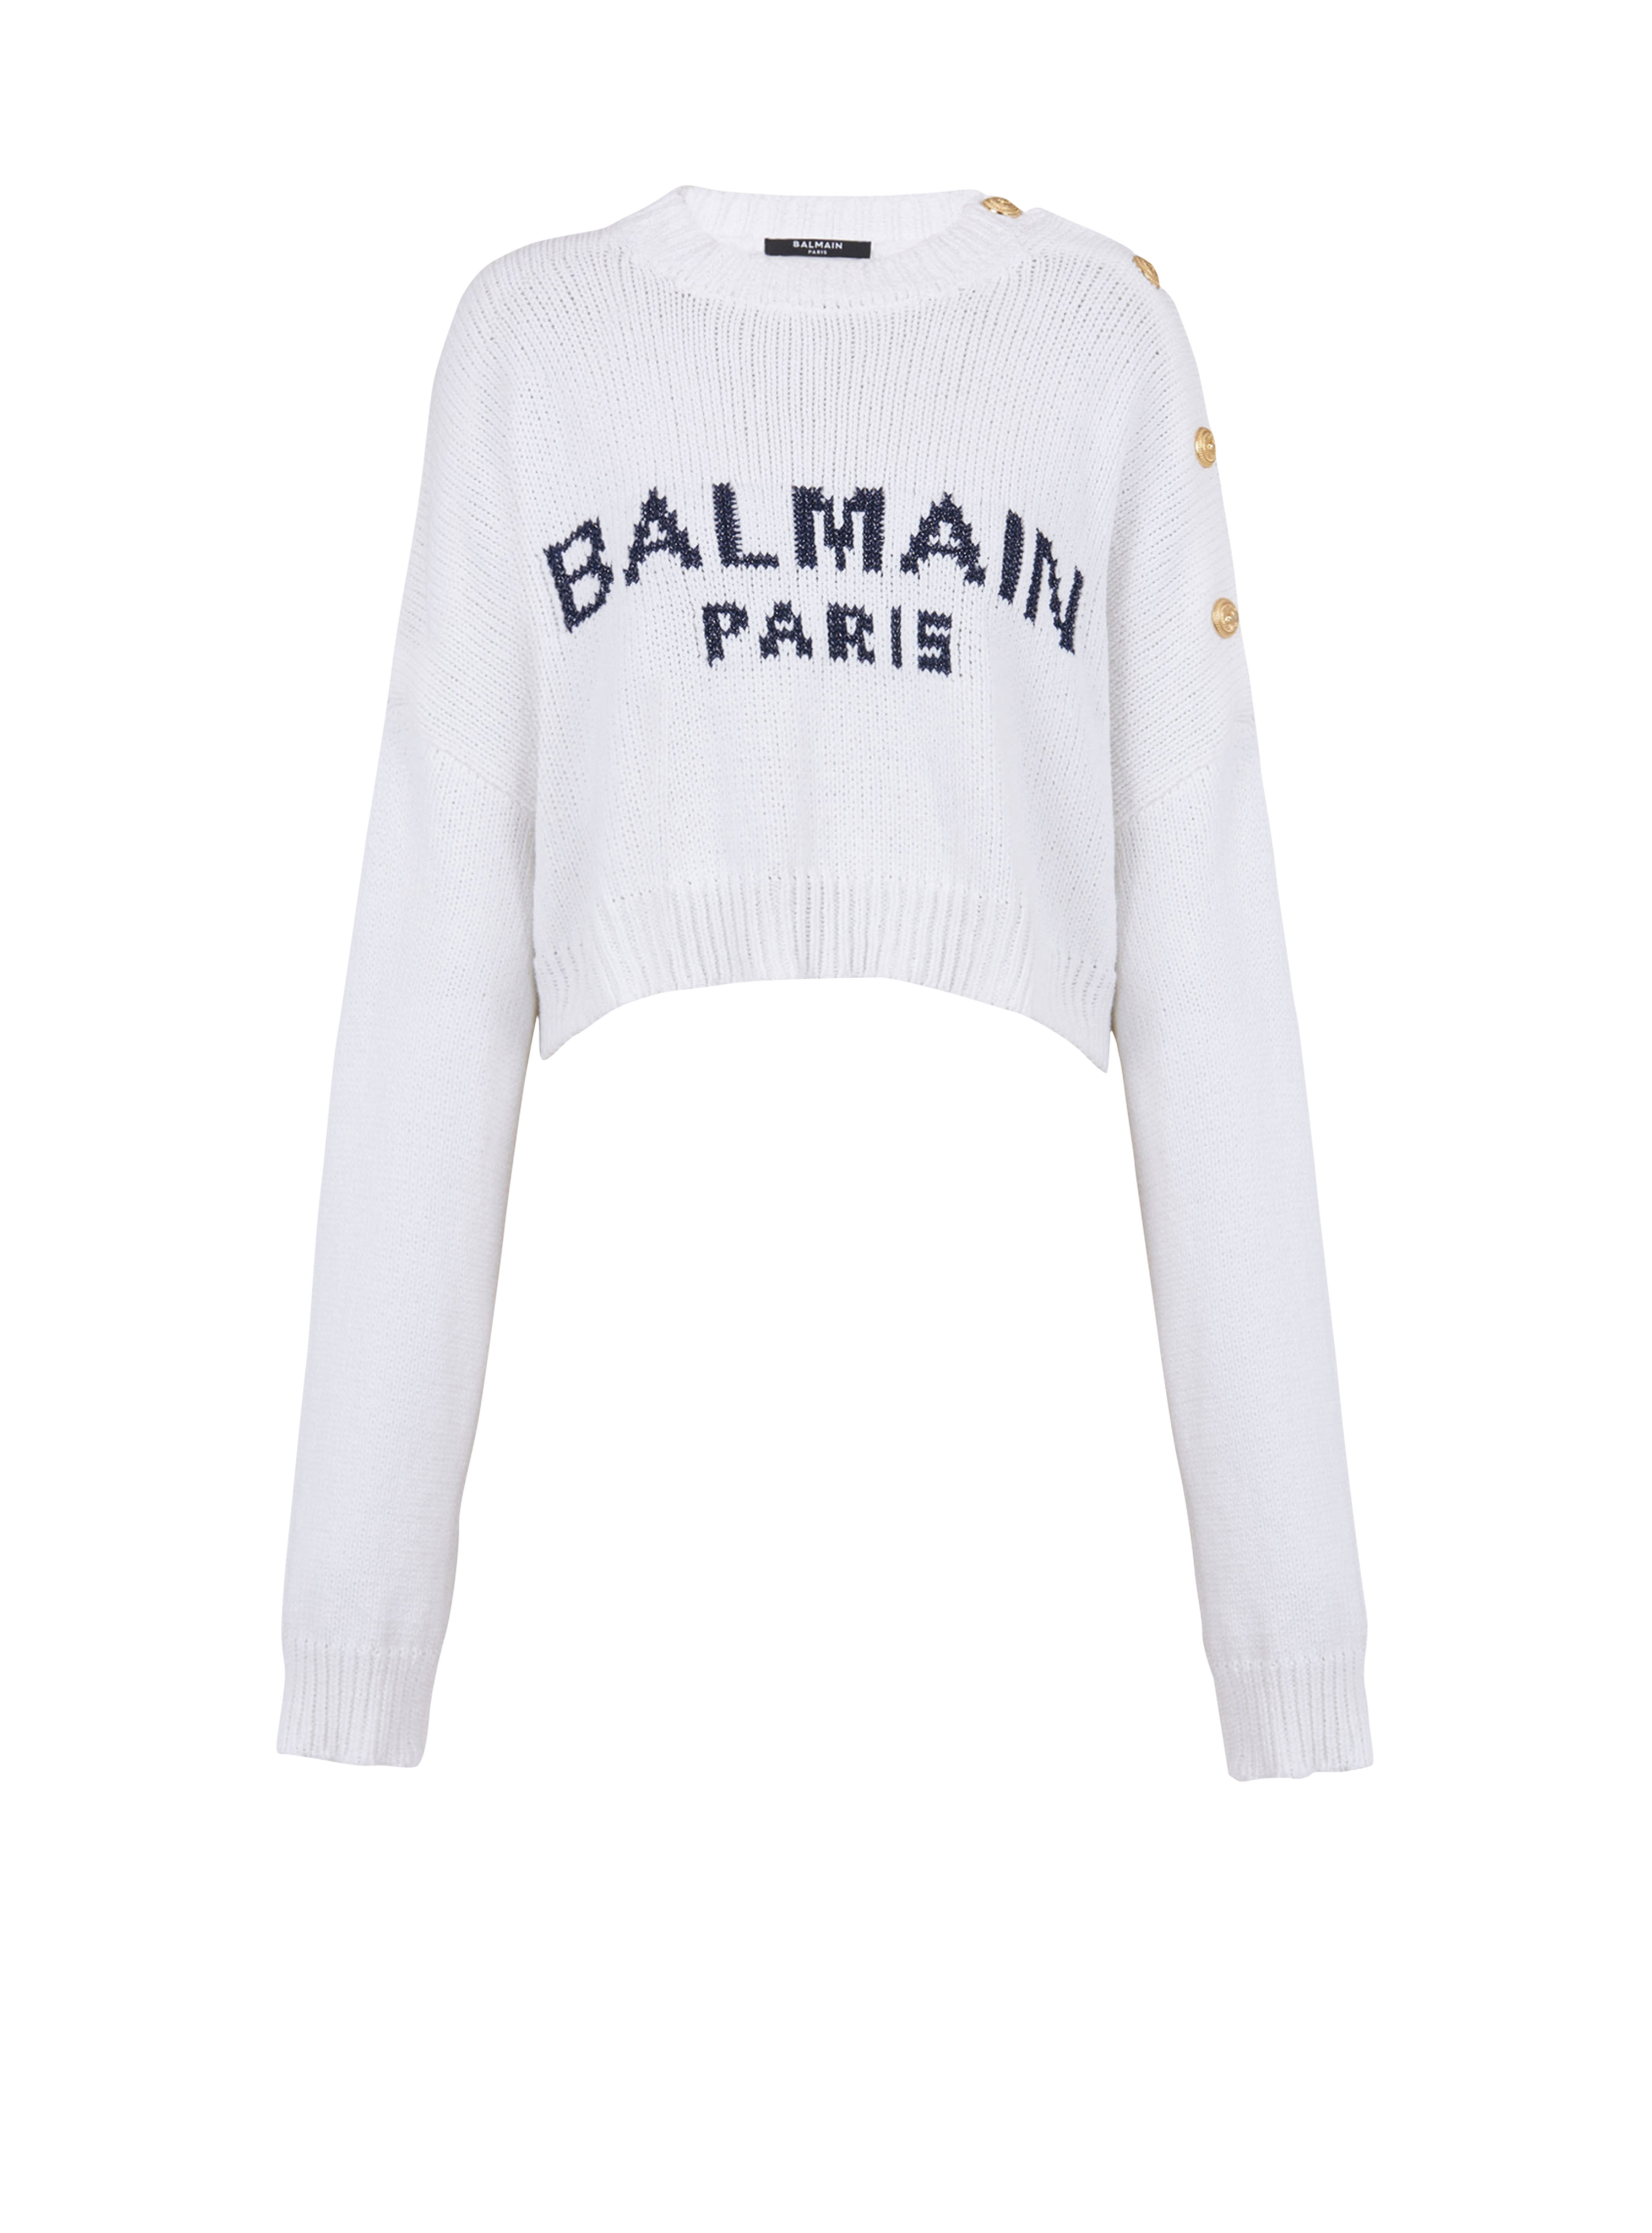 HIGH SUMMER CAPSULE - Cropped knit sweater with Balmain logo print, white